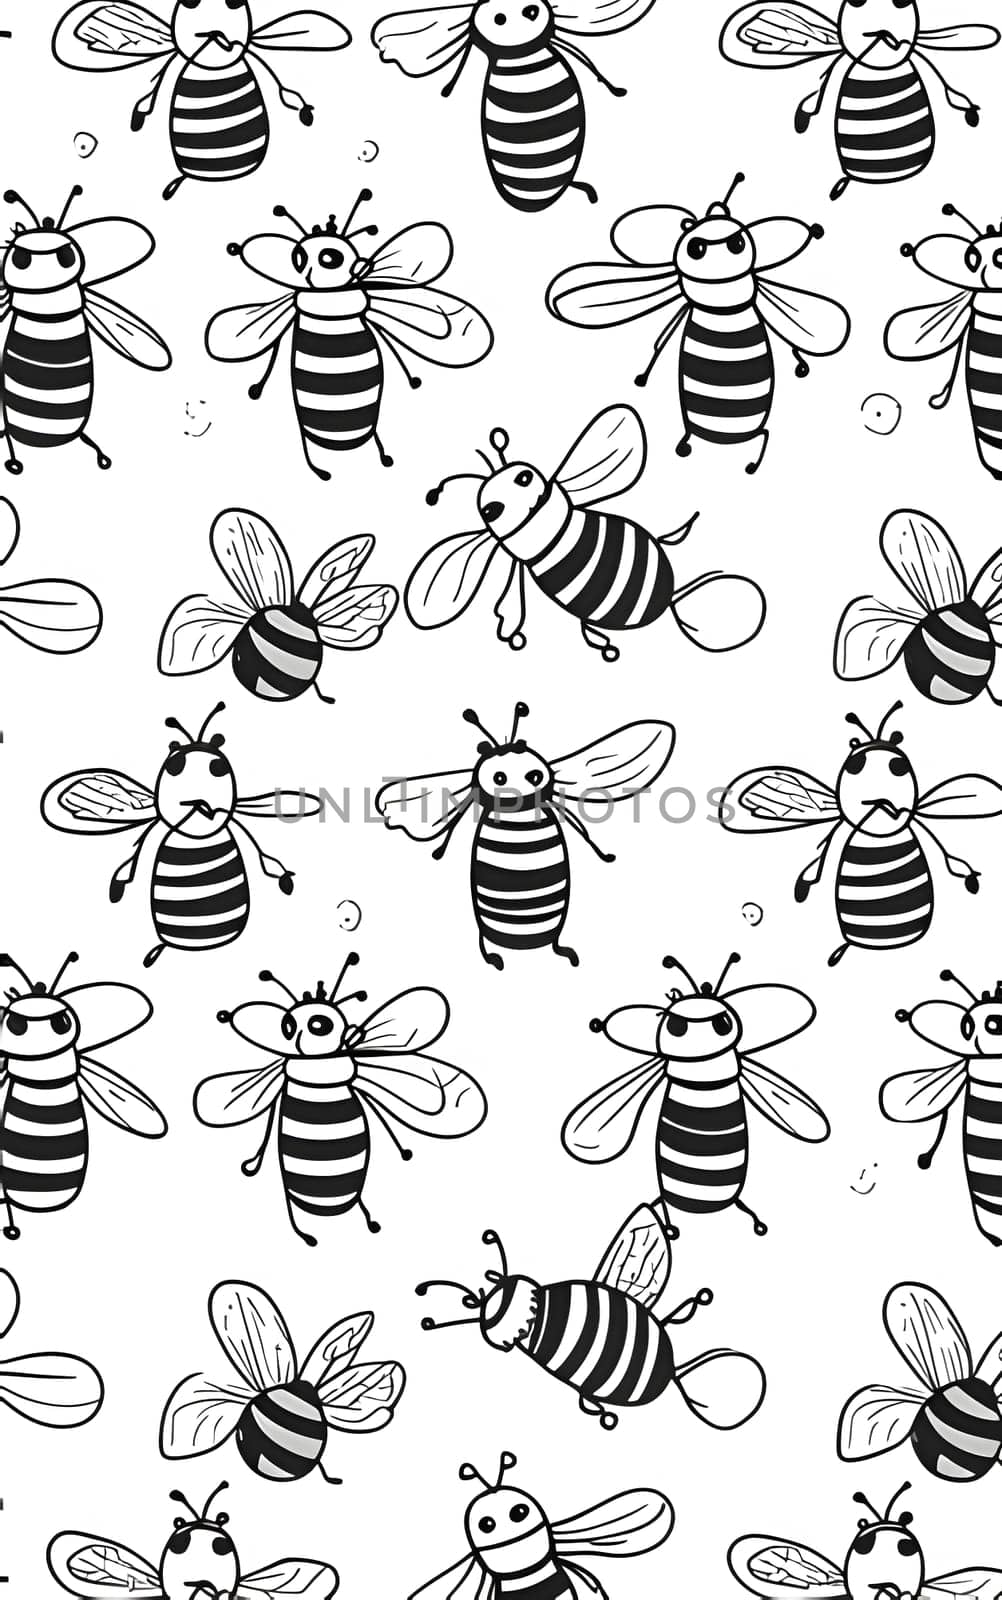 Patterns and banners backgrounds: Seamless pattern with cute cartoon bees. Black and white vector illustration.